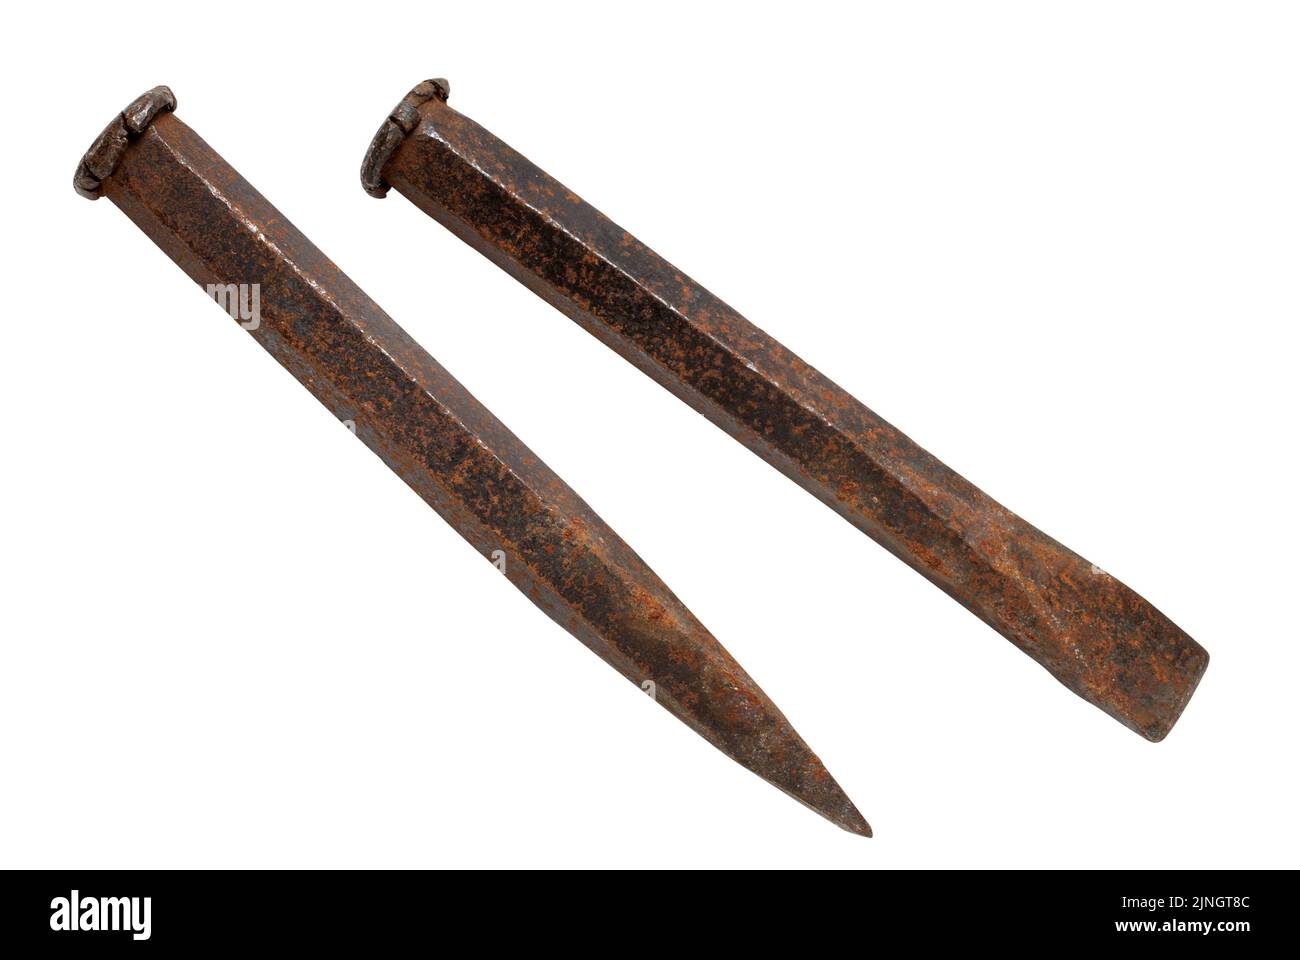 Two views of a rusty old metal chisel, isolated on white with path Stock Photo